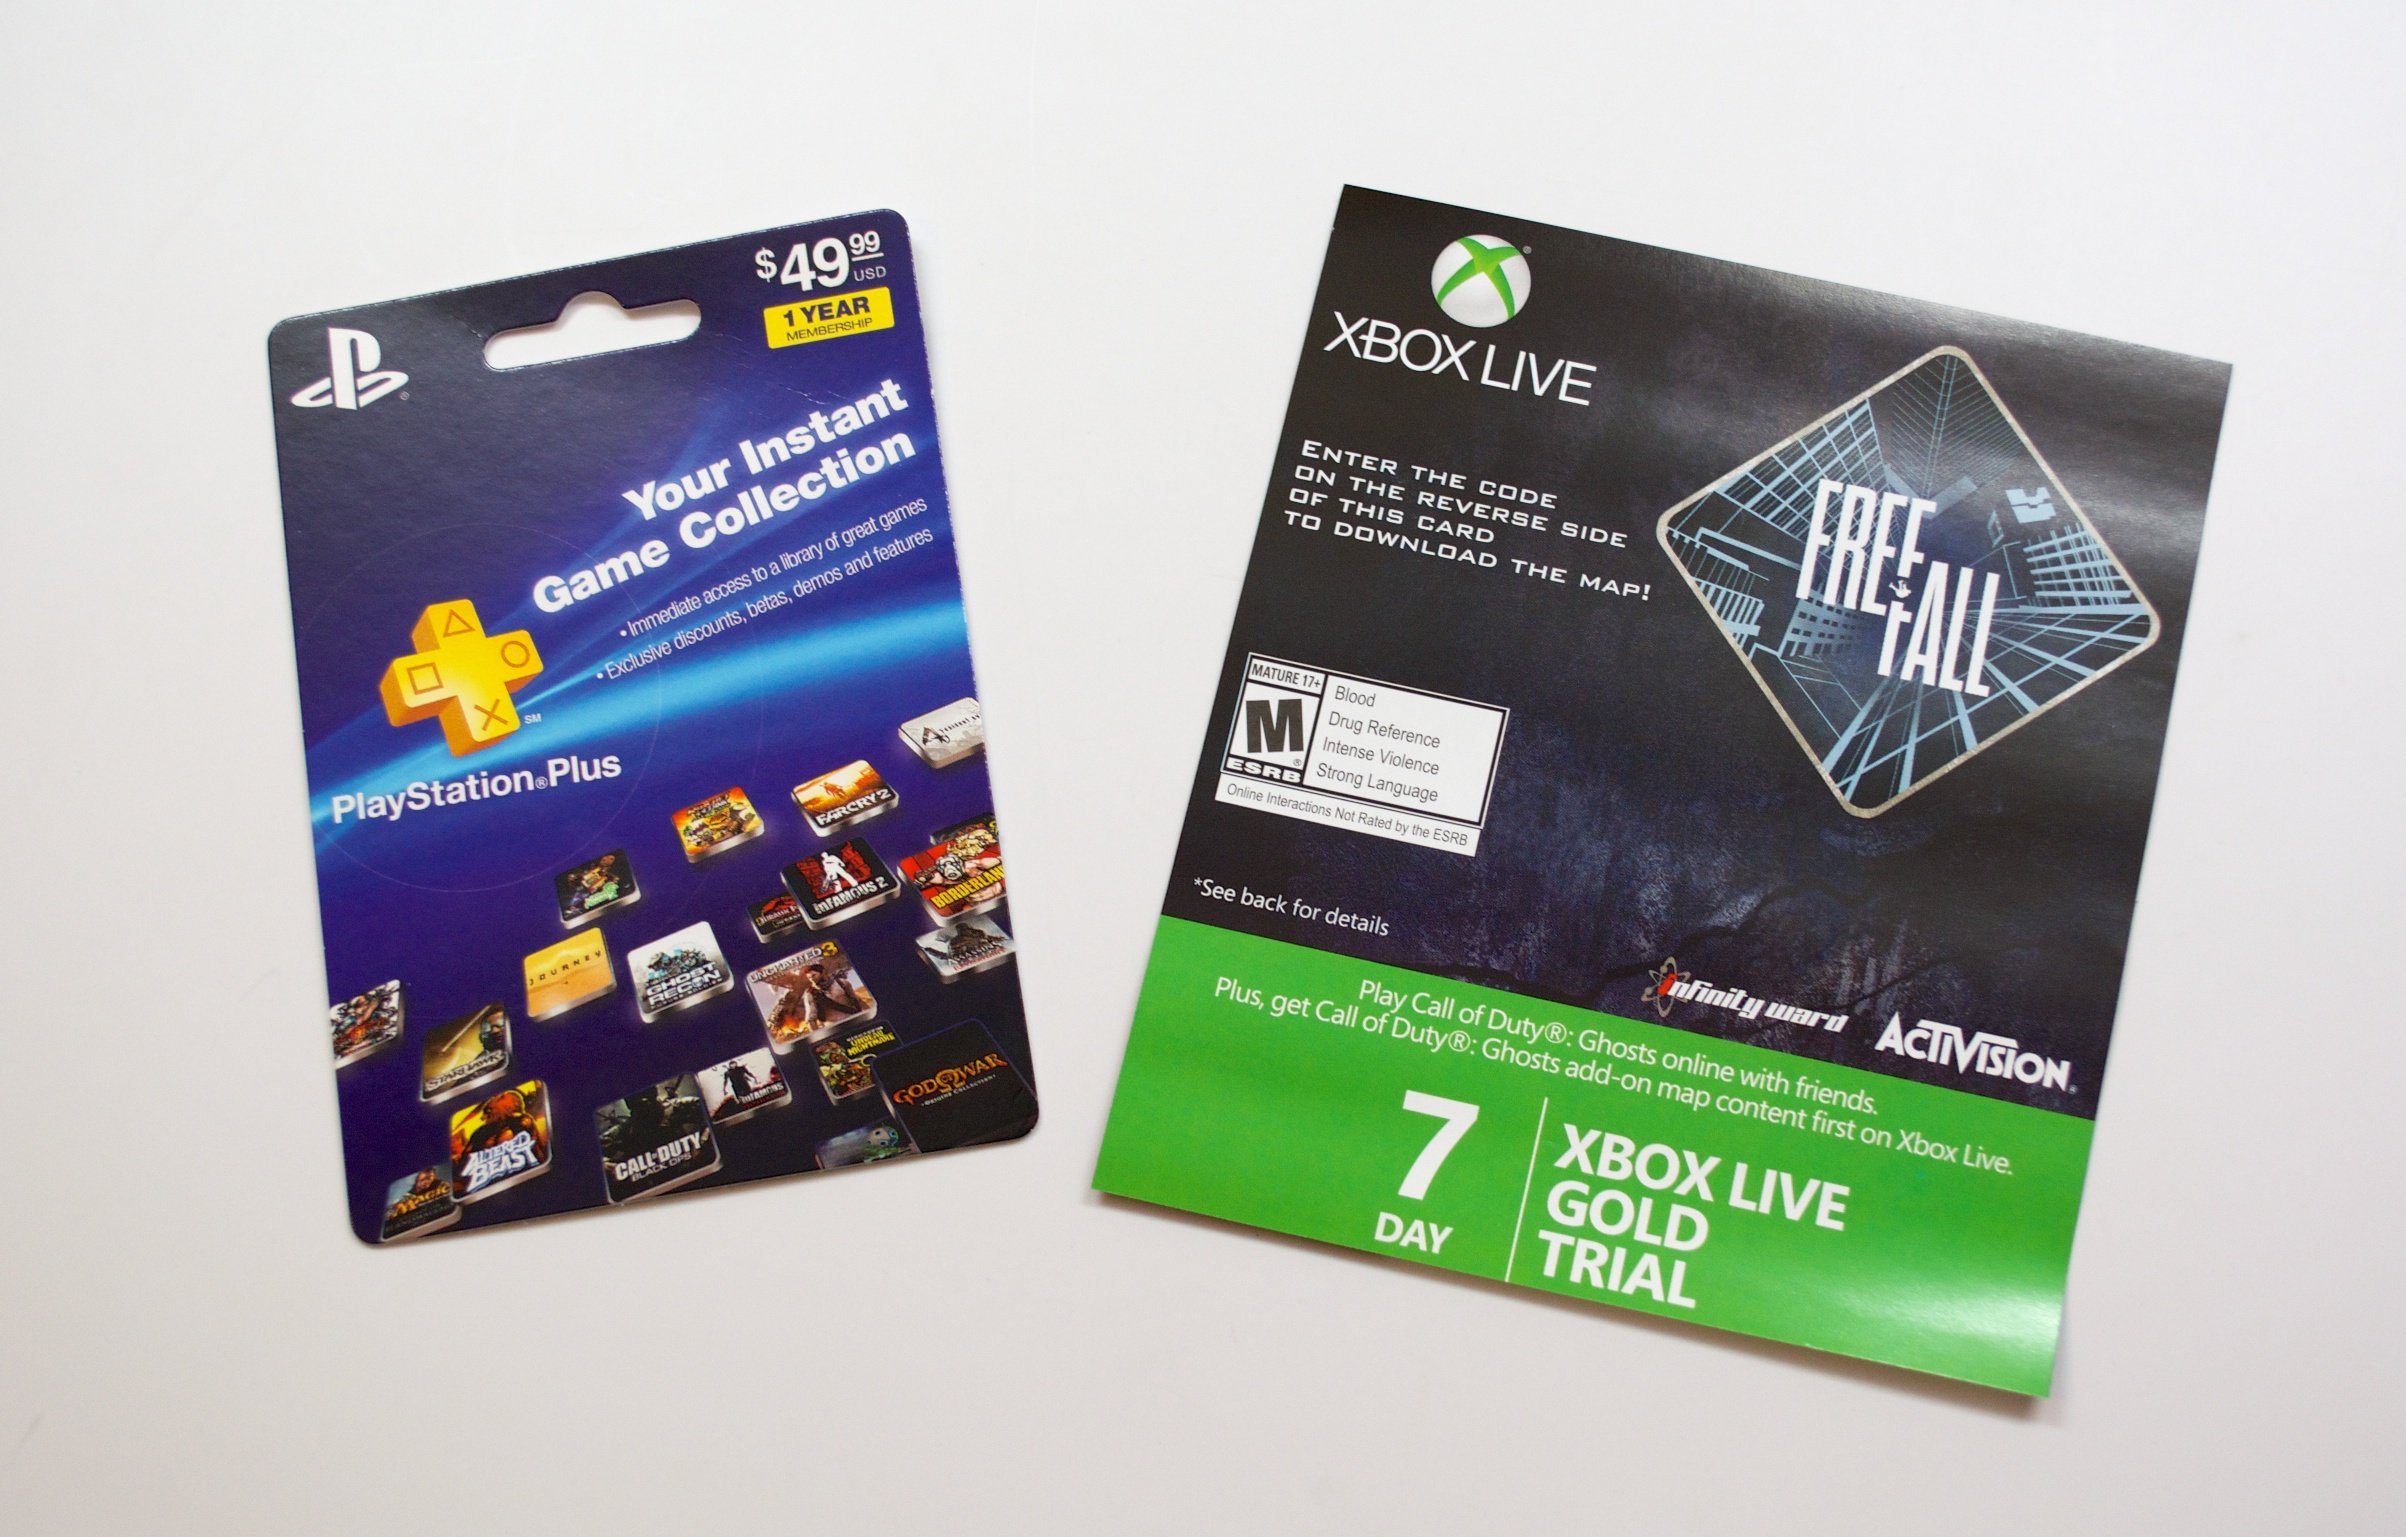 Gamers will need Xbox Live Gold ($60 a year) or PlayStation Plus ($50 a year) for a full experience.